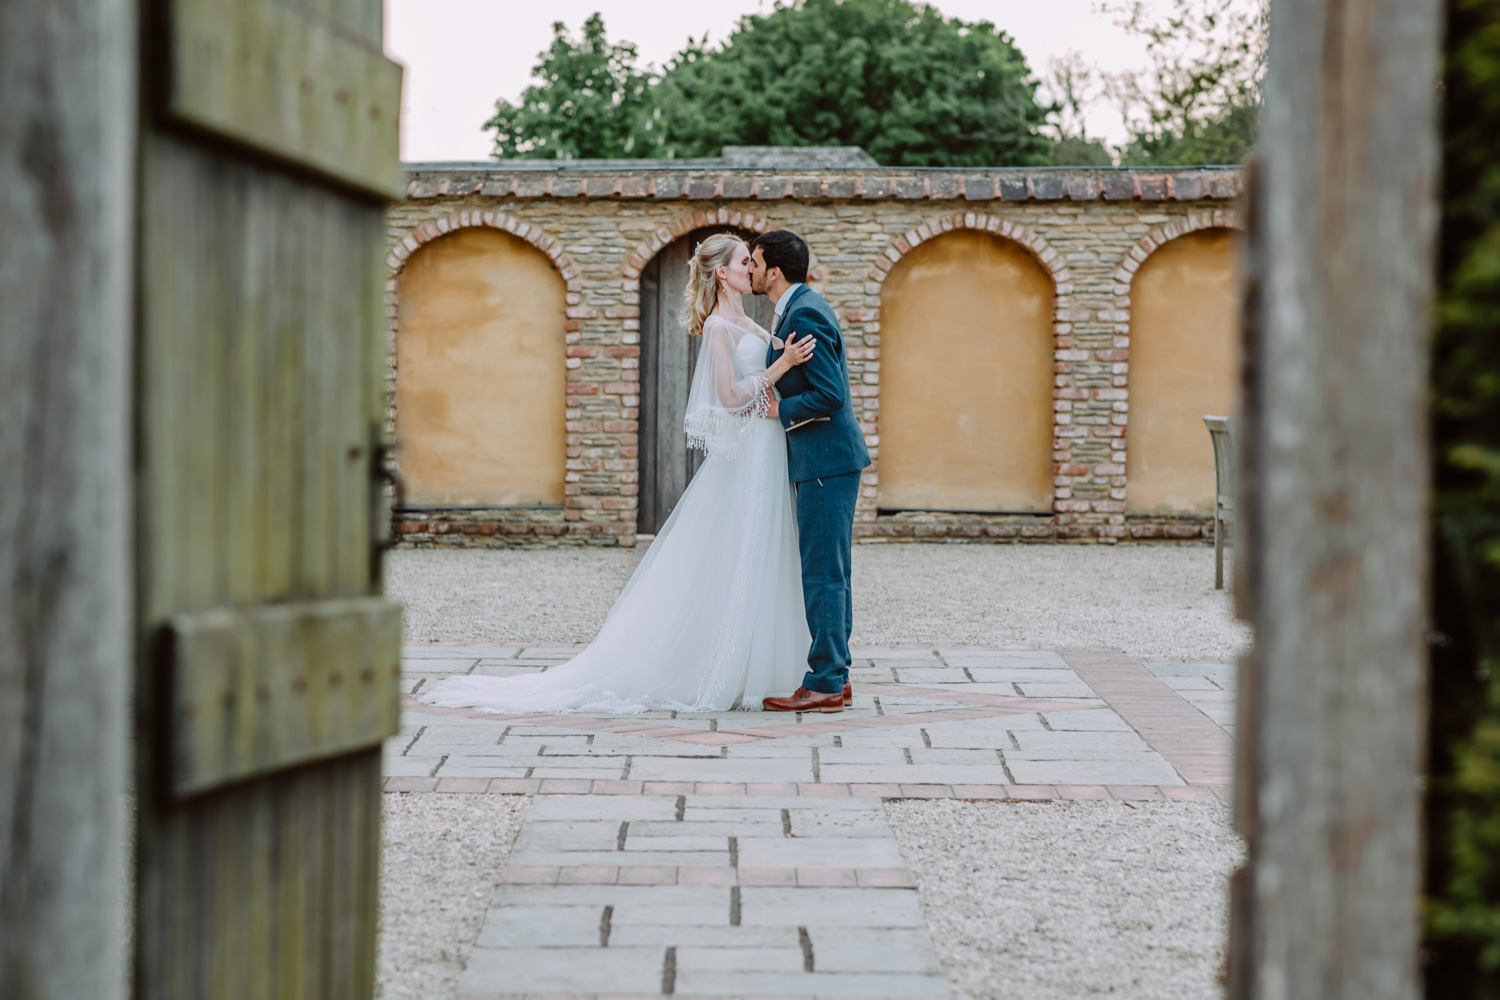 Intimate photo of the bride and groom kiss by the brick wall feature 